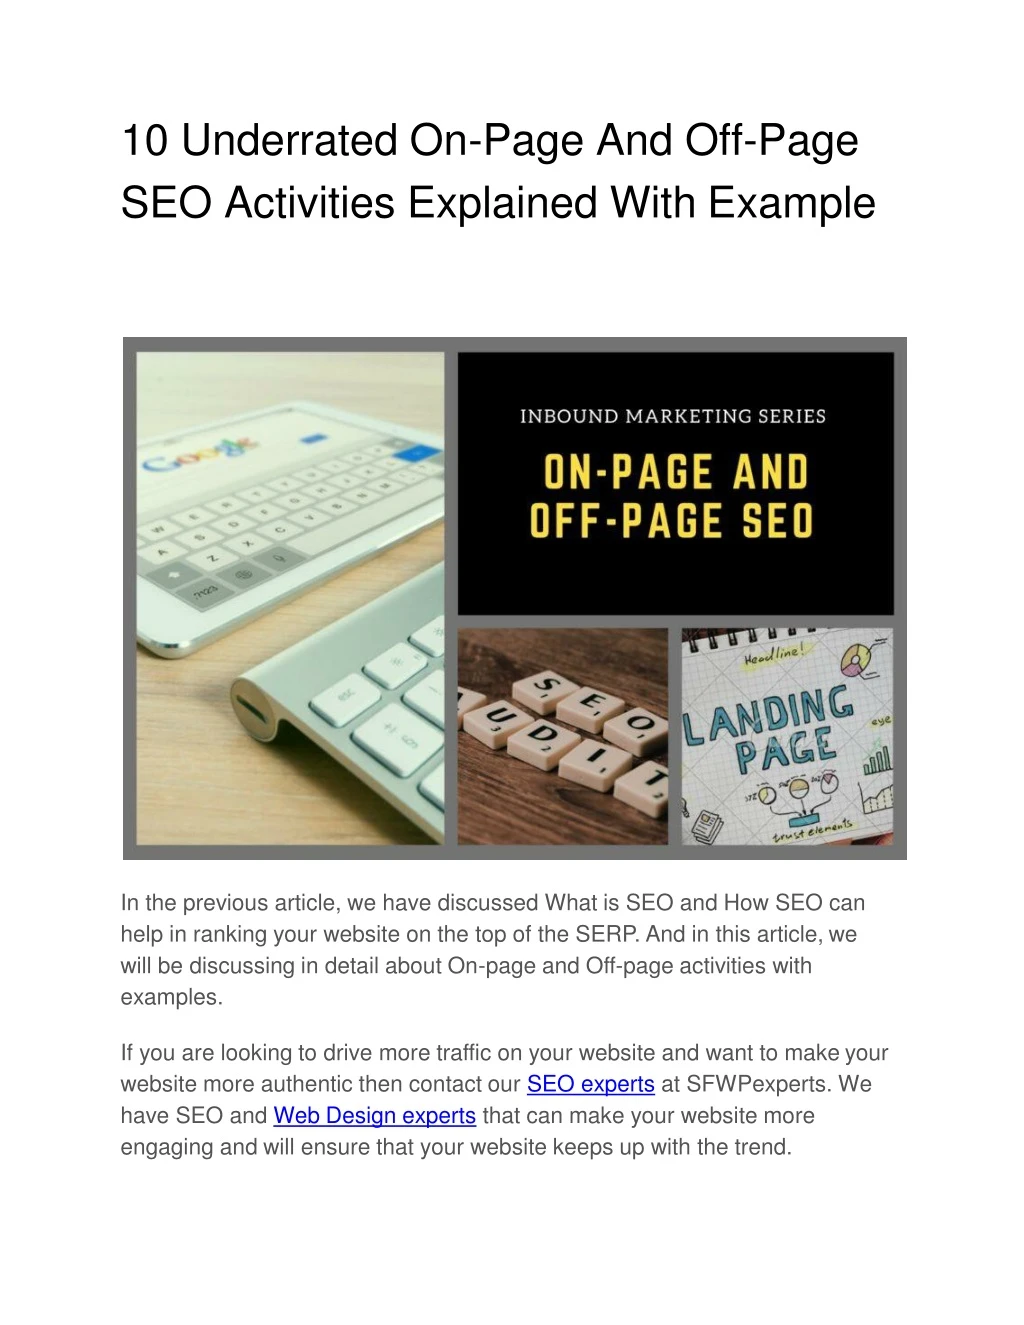 10 underrated on page and off page seo activities explained with example